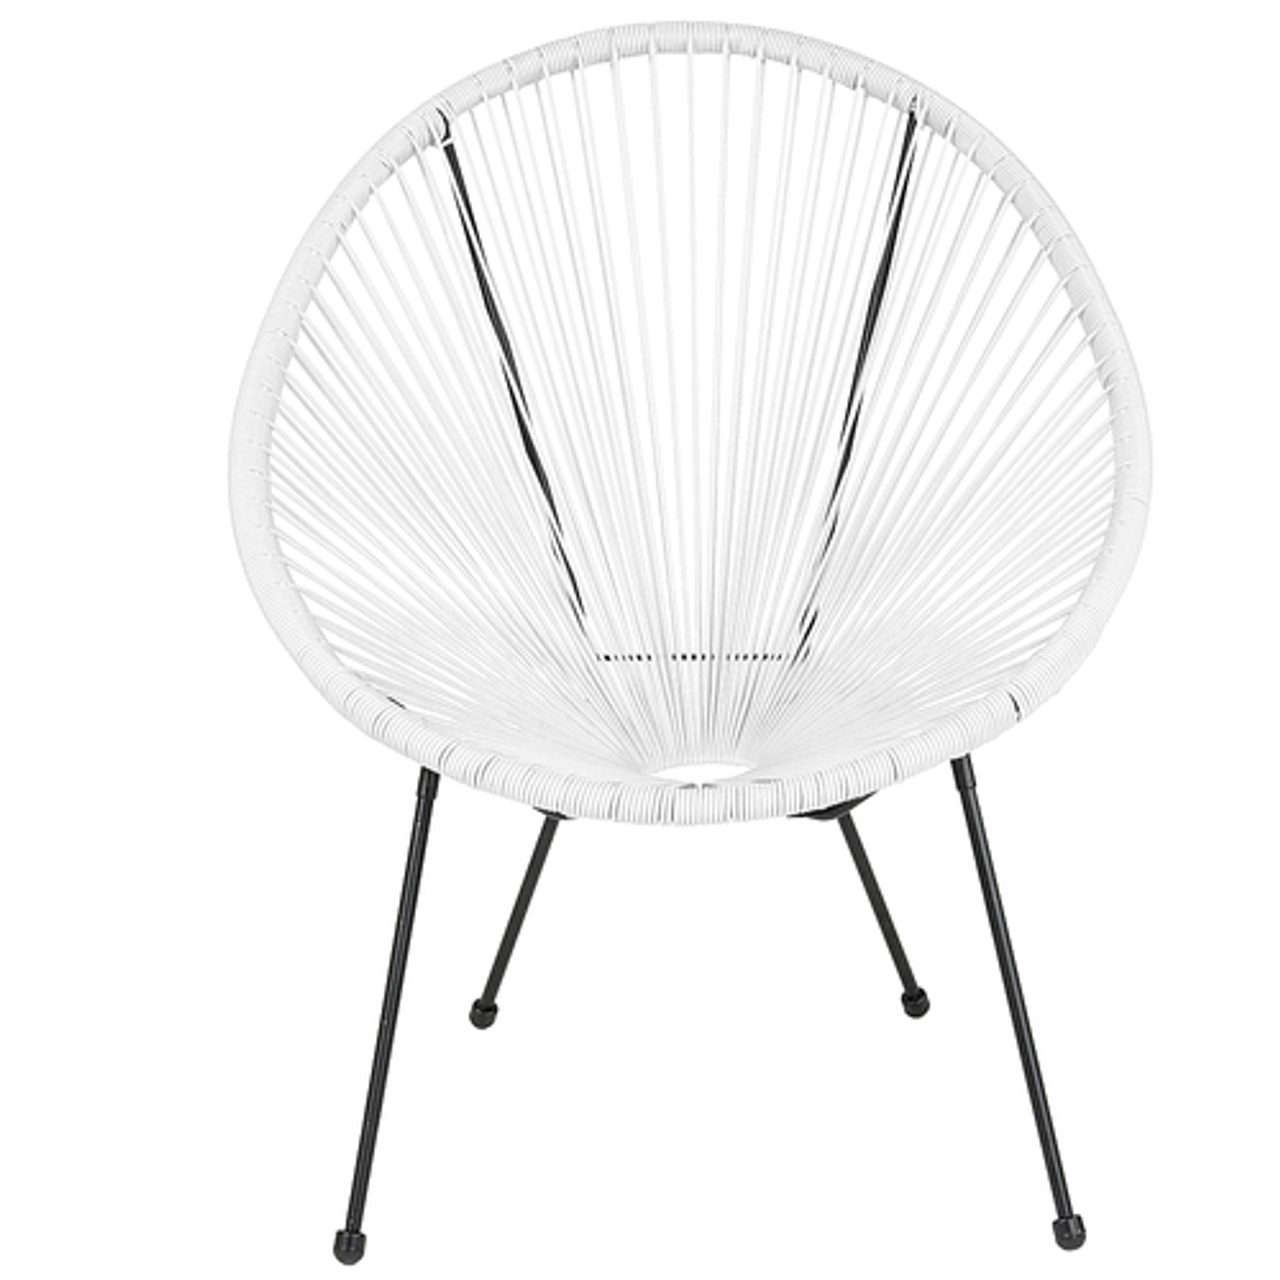 Flash Furniture - Valencia Oval Comfort Take Ten  Contemporary Bungee Bungee Chair - White